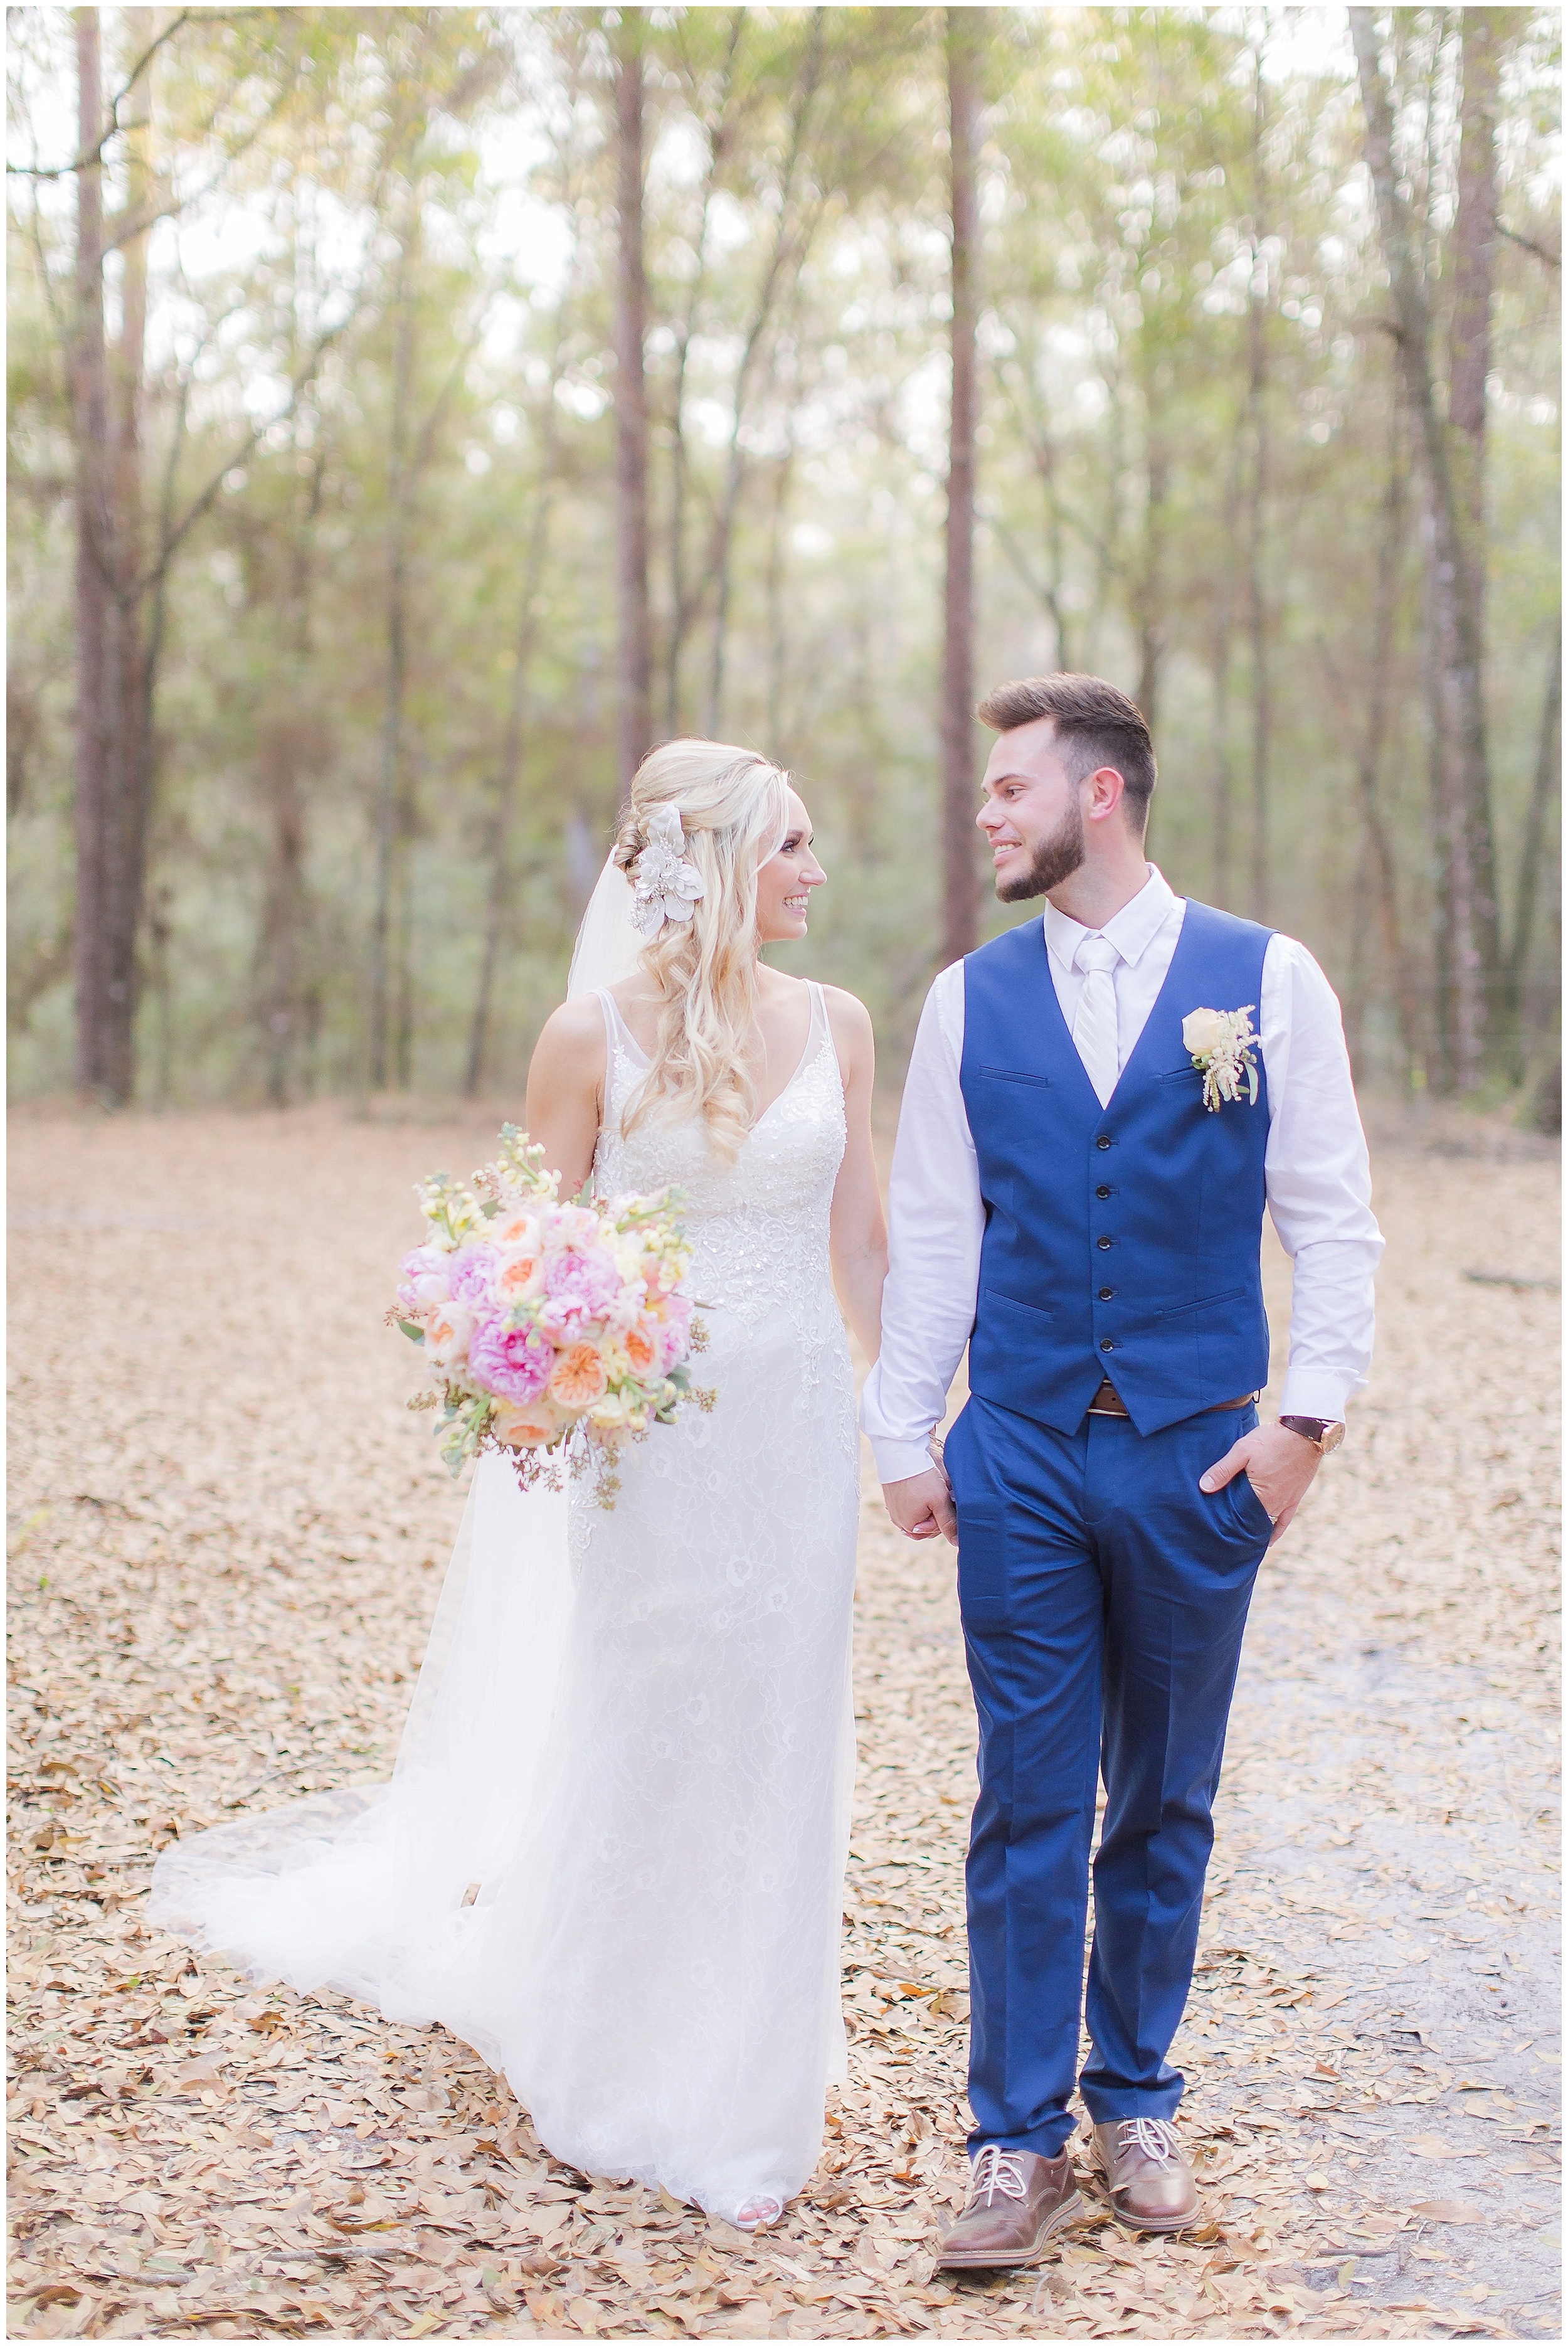 Bride and Groom Walking in the Woods After Rustic Wedding 